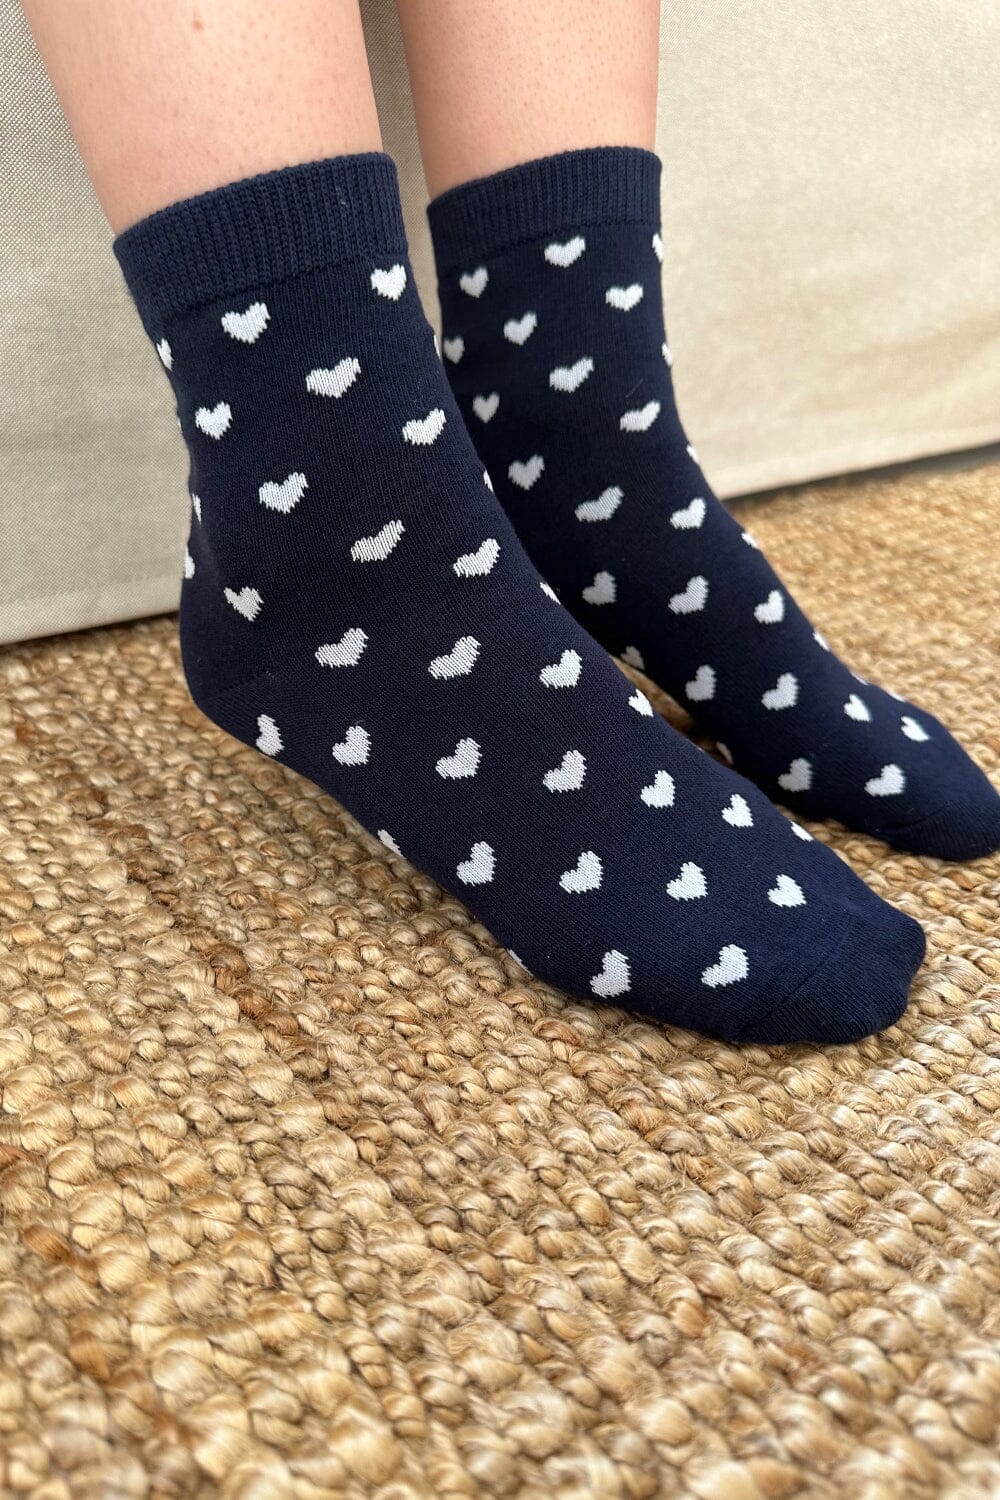 Navy Blue with White Hearts